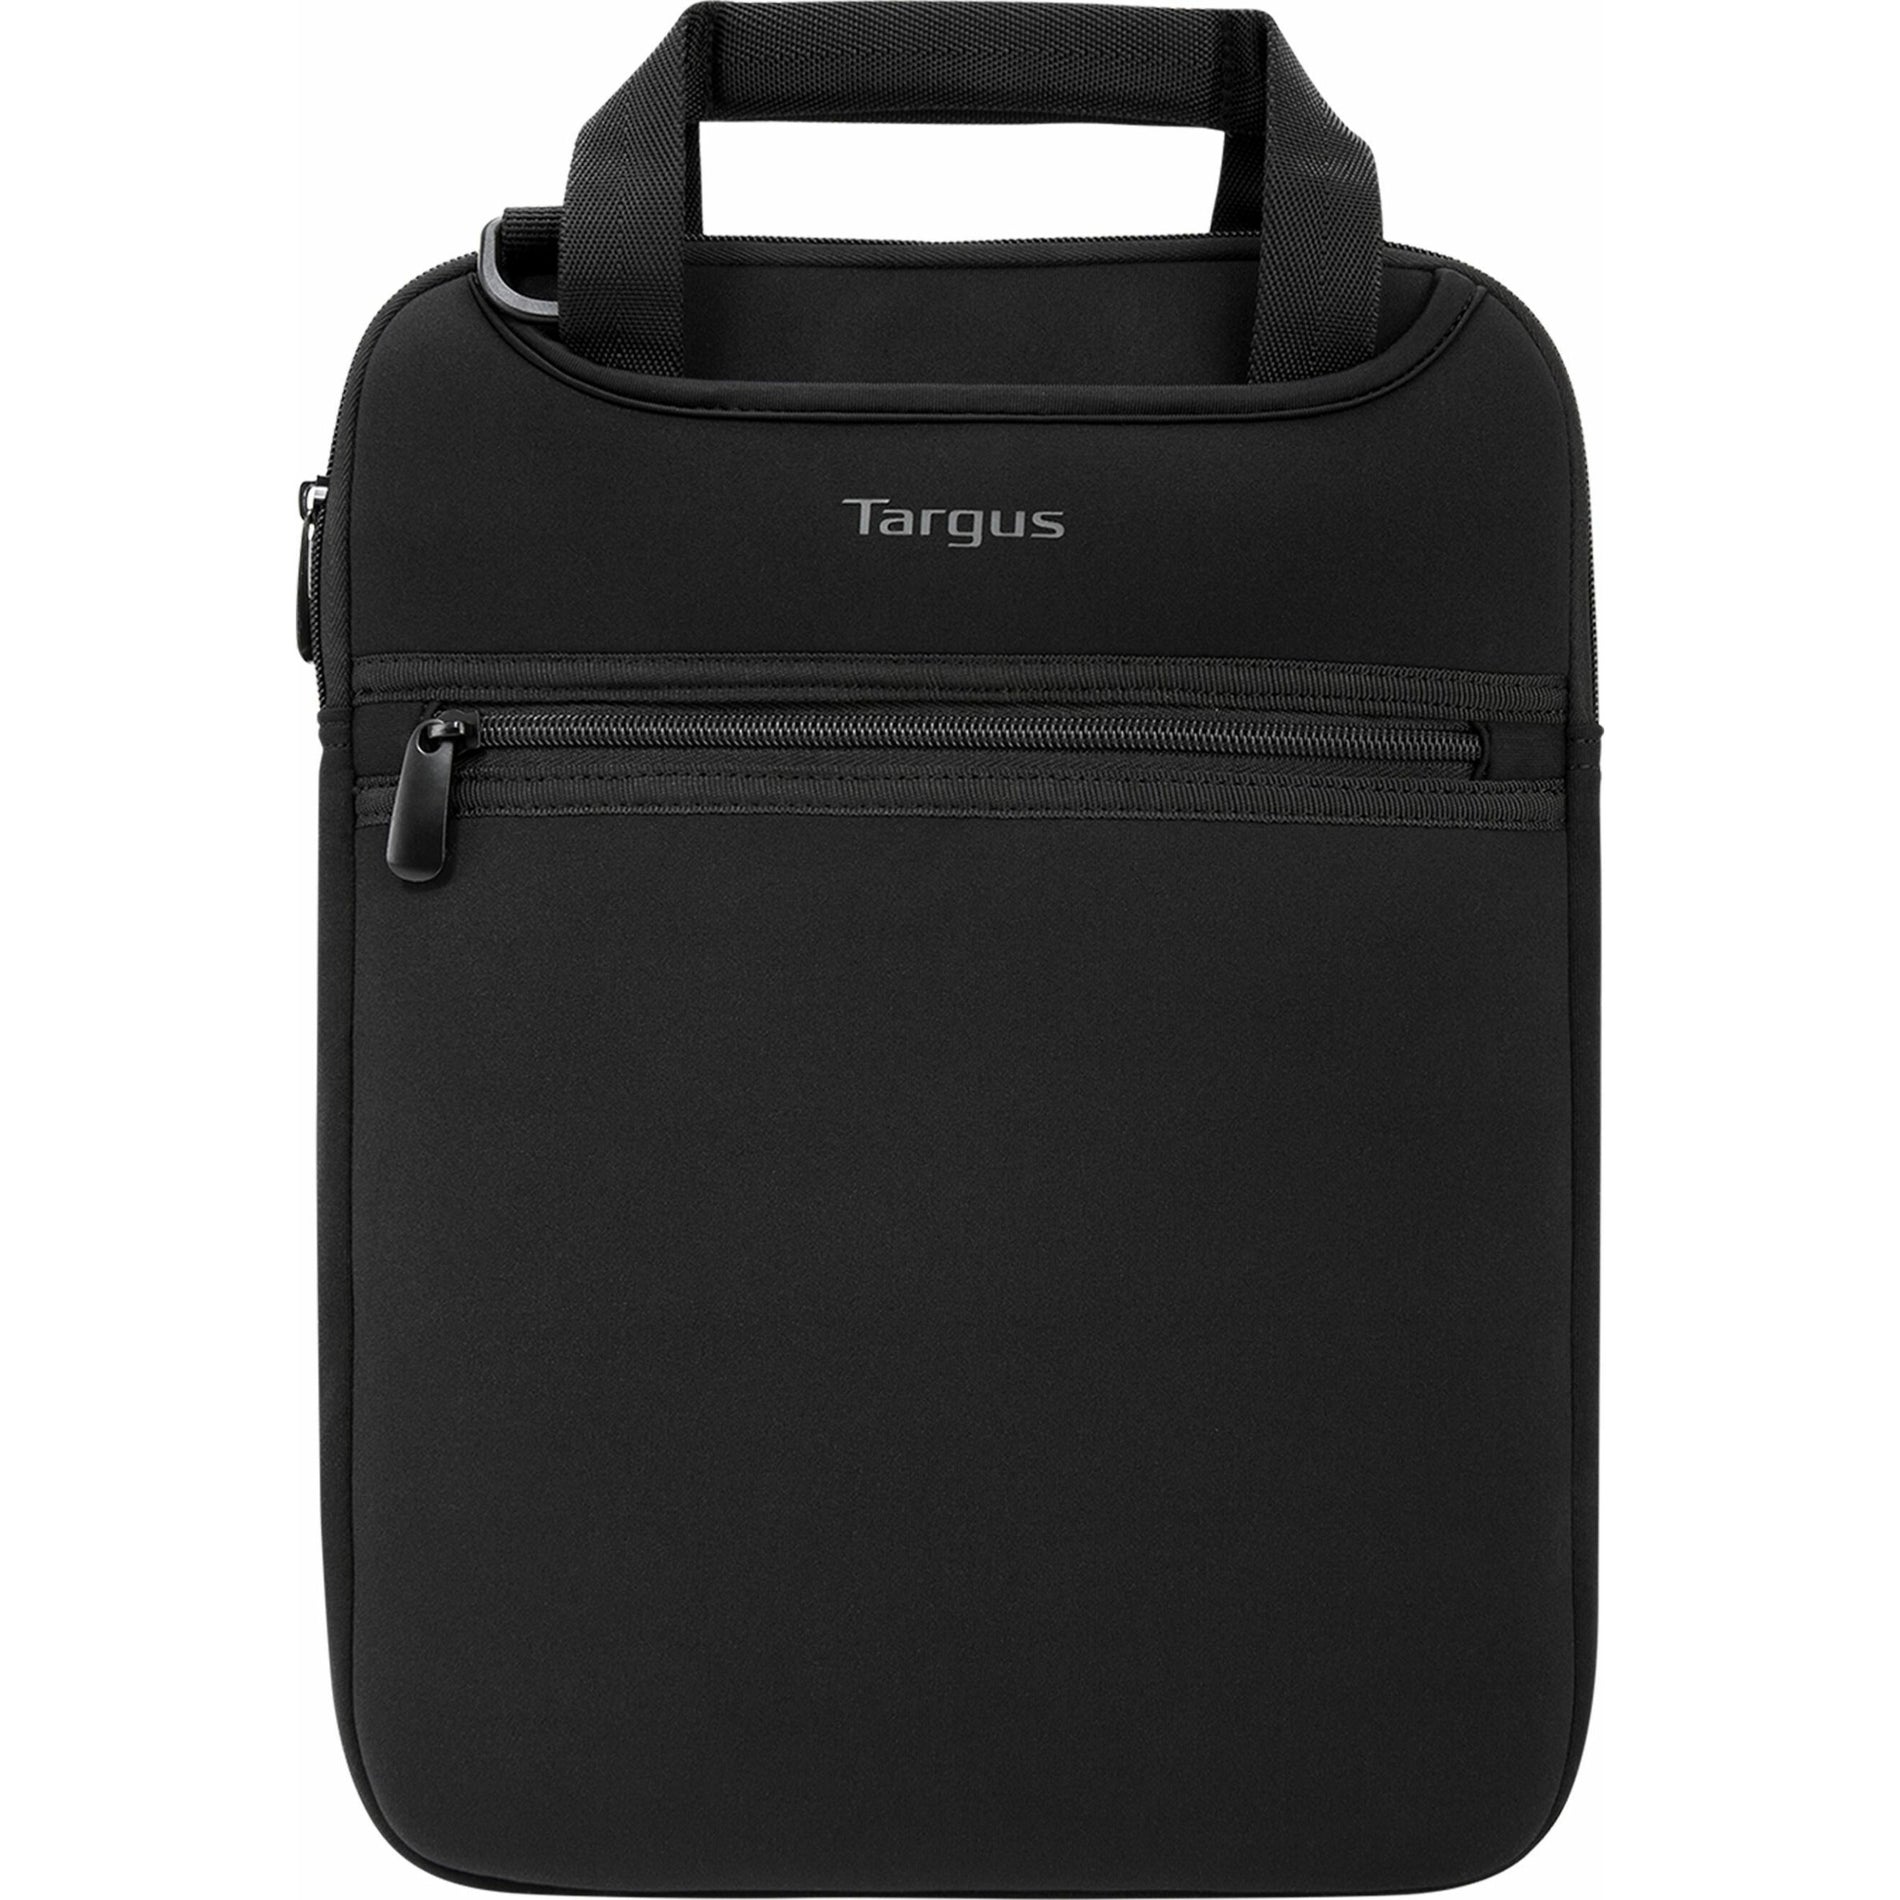 Targus TSS912 Slipcase for 12" Notebook, Black, with Hideaway Handles